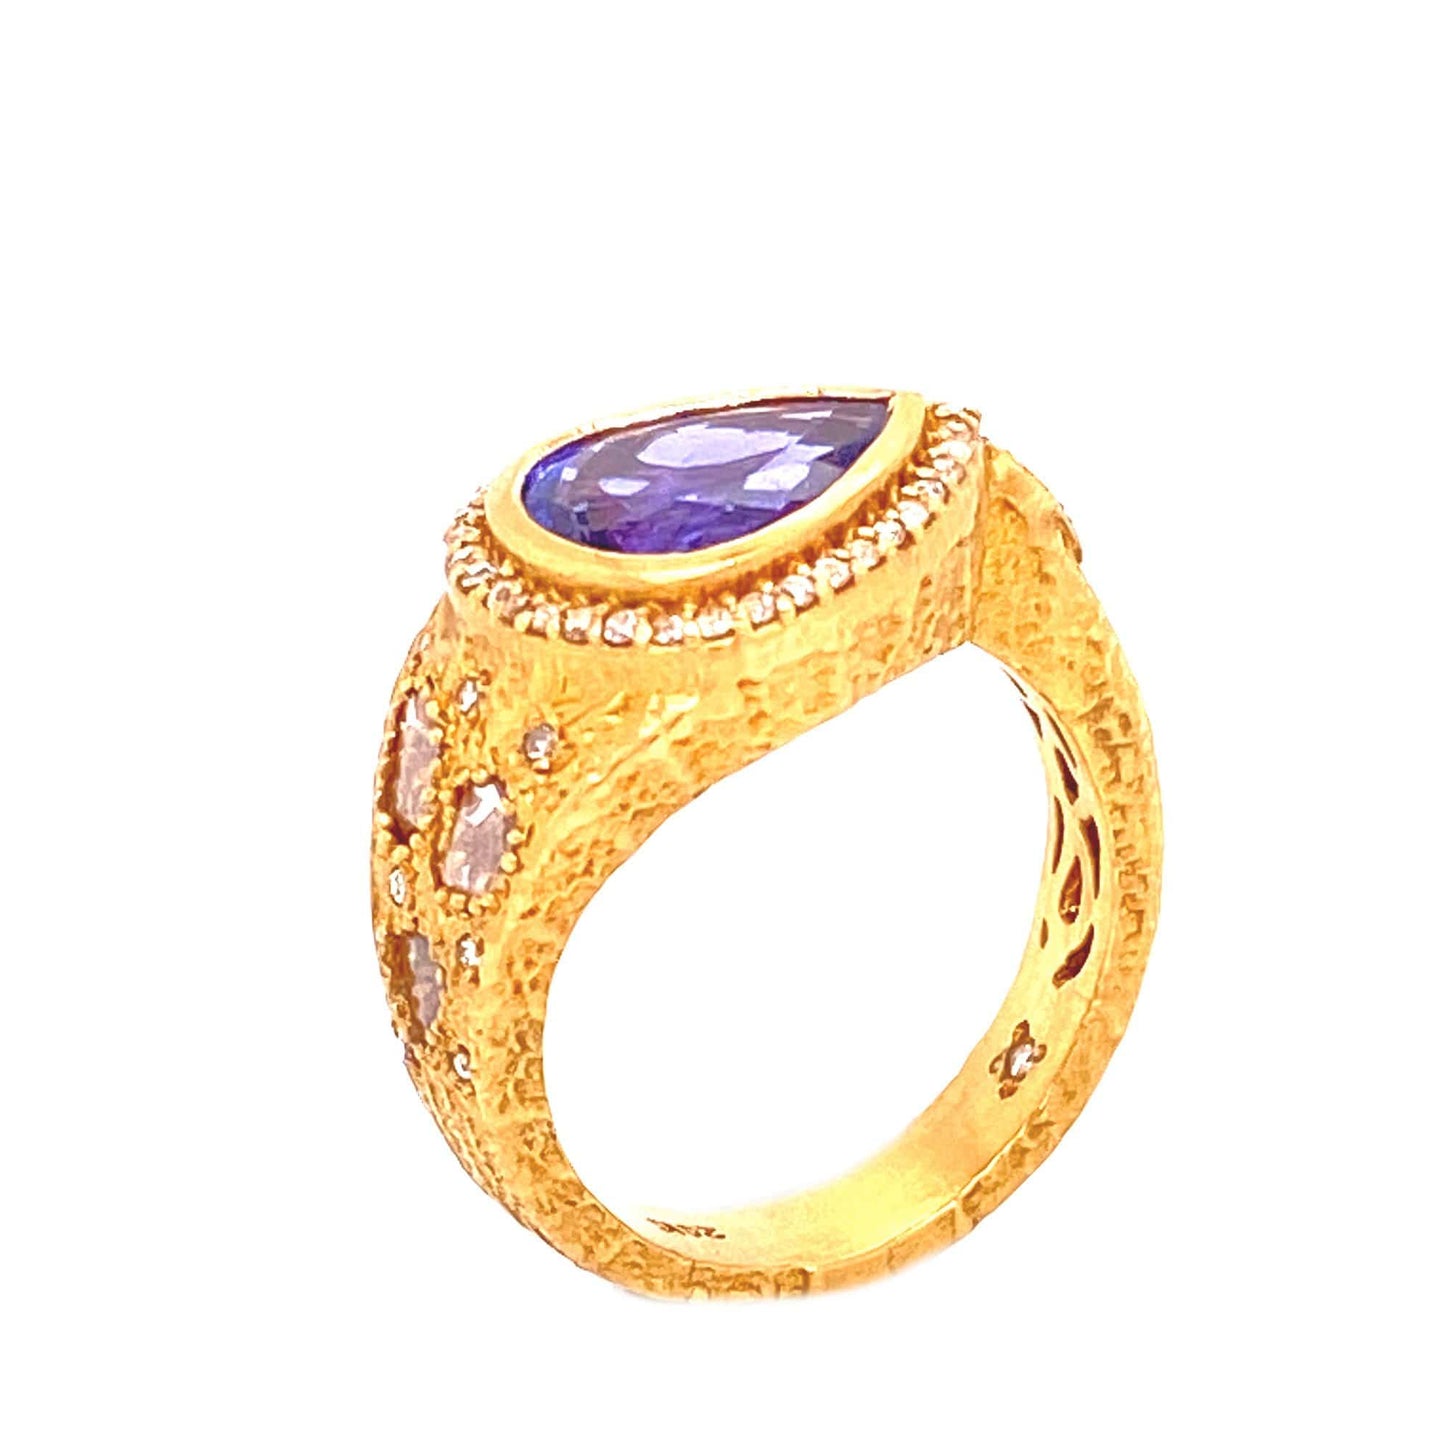 Affinity 20K Yellow Gold and Tanzanite Ring - Coomi